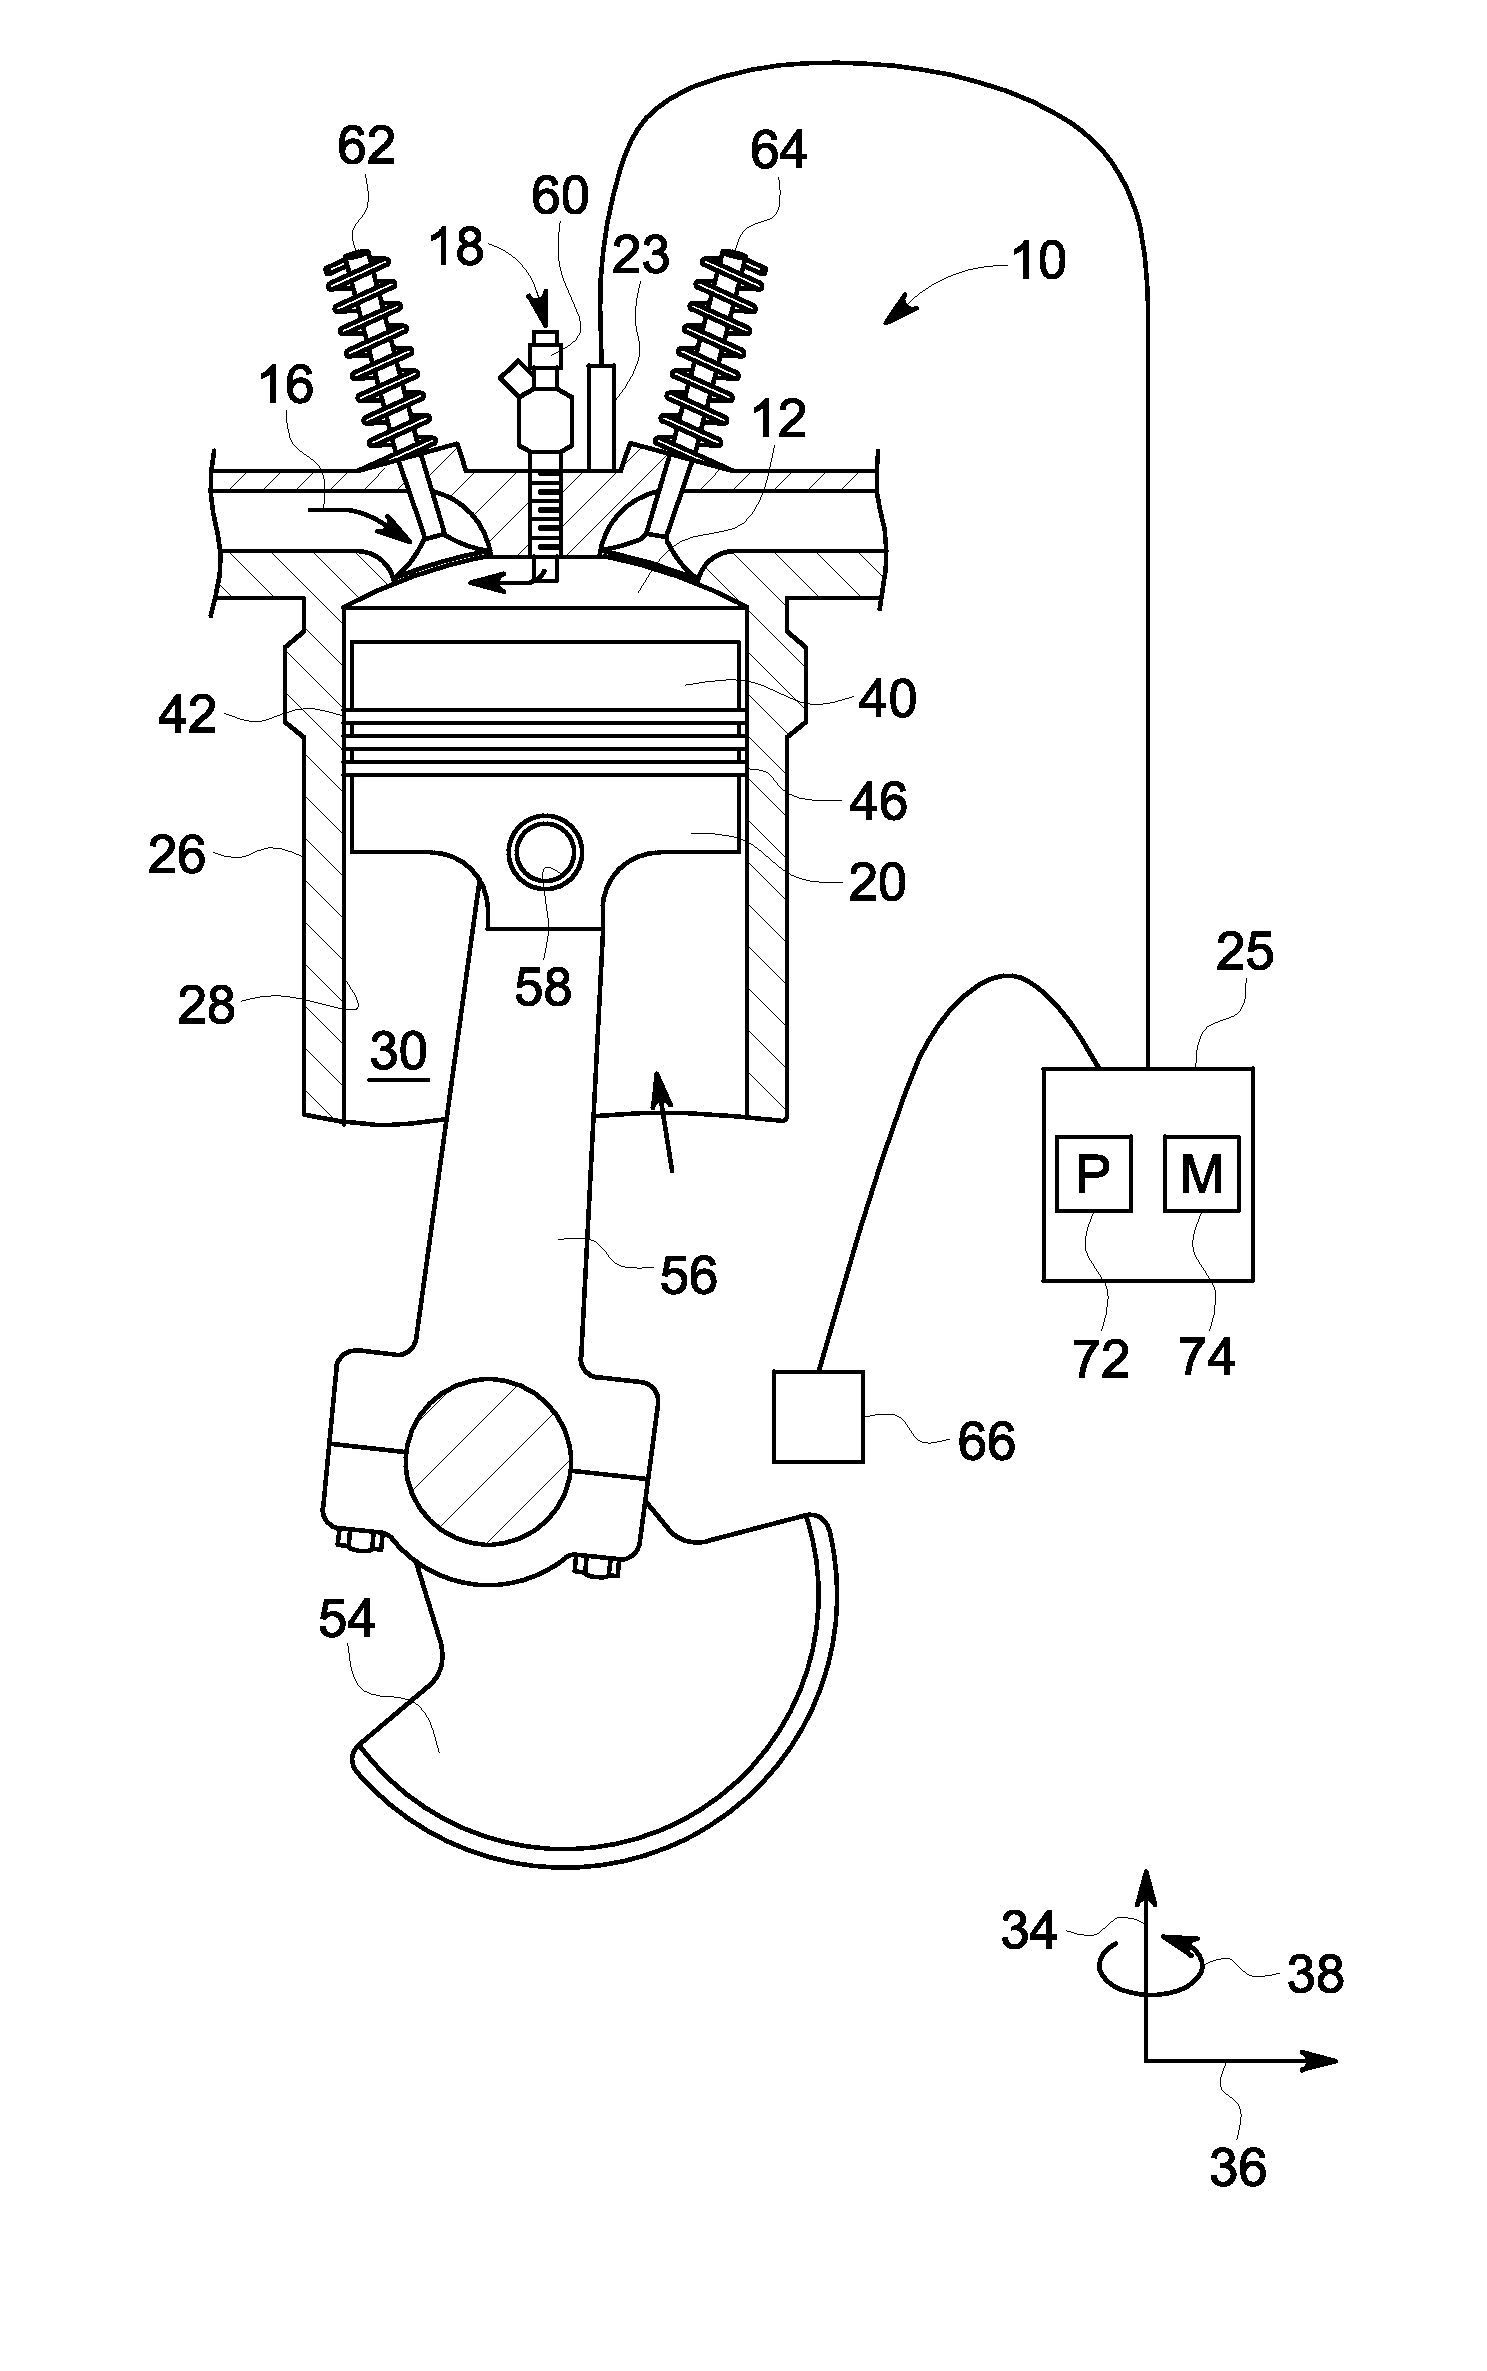 Systems and methods for estimating a time of an engine event